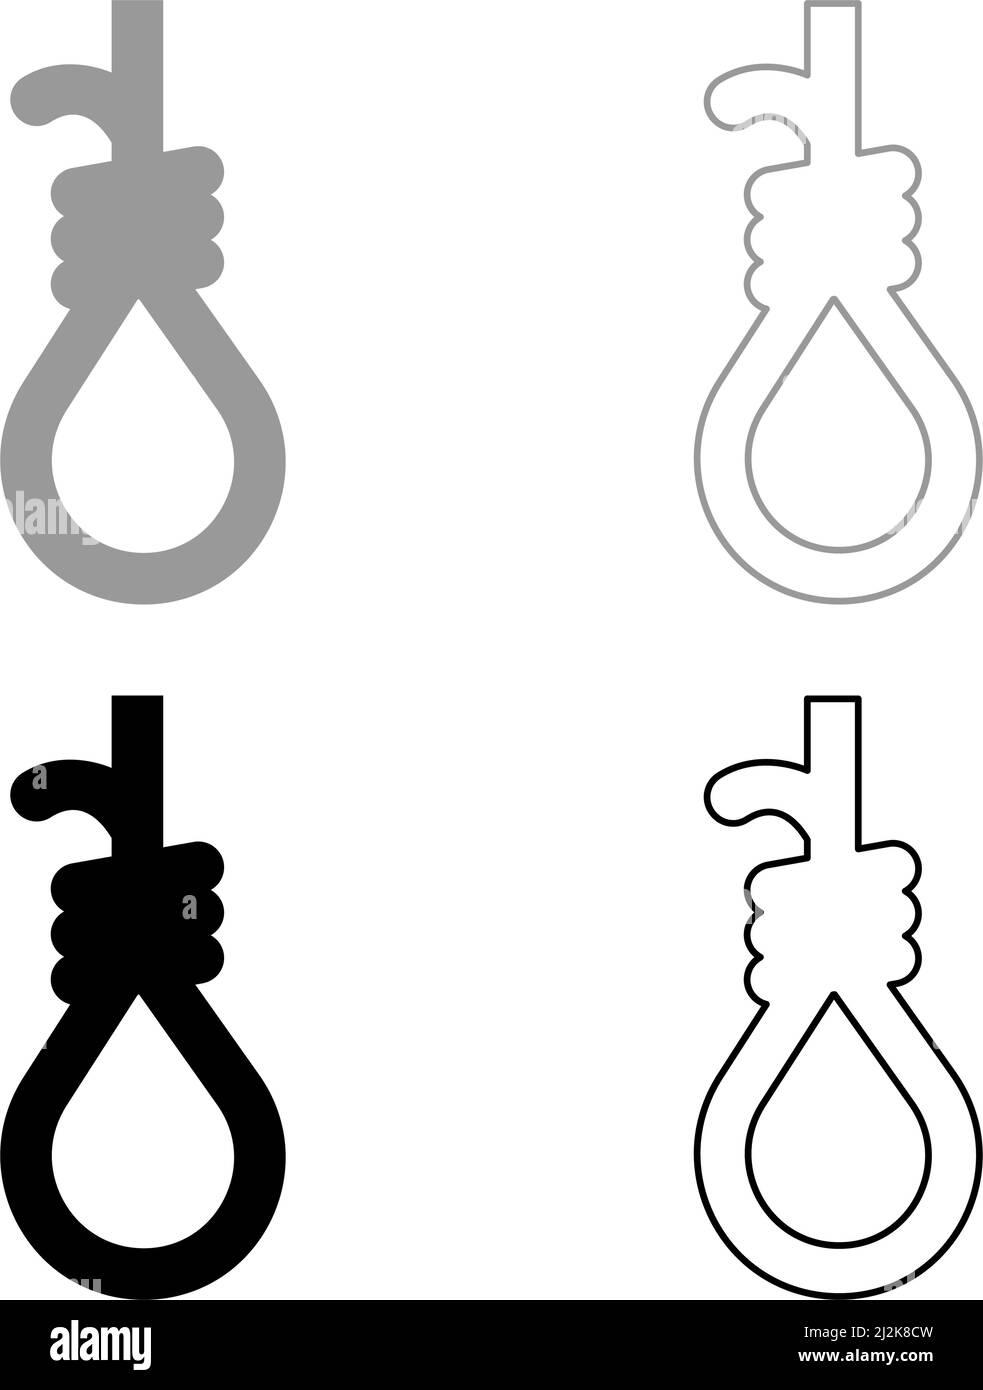 Loop for gallows hangman's noose Rope suicide lynching set icon grey black color vector illustration image simple solid fill outline contour line Stock Vector